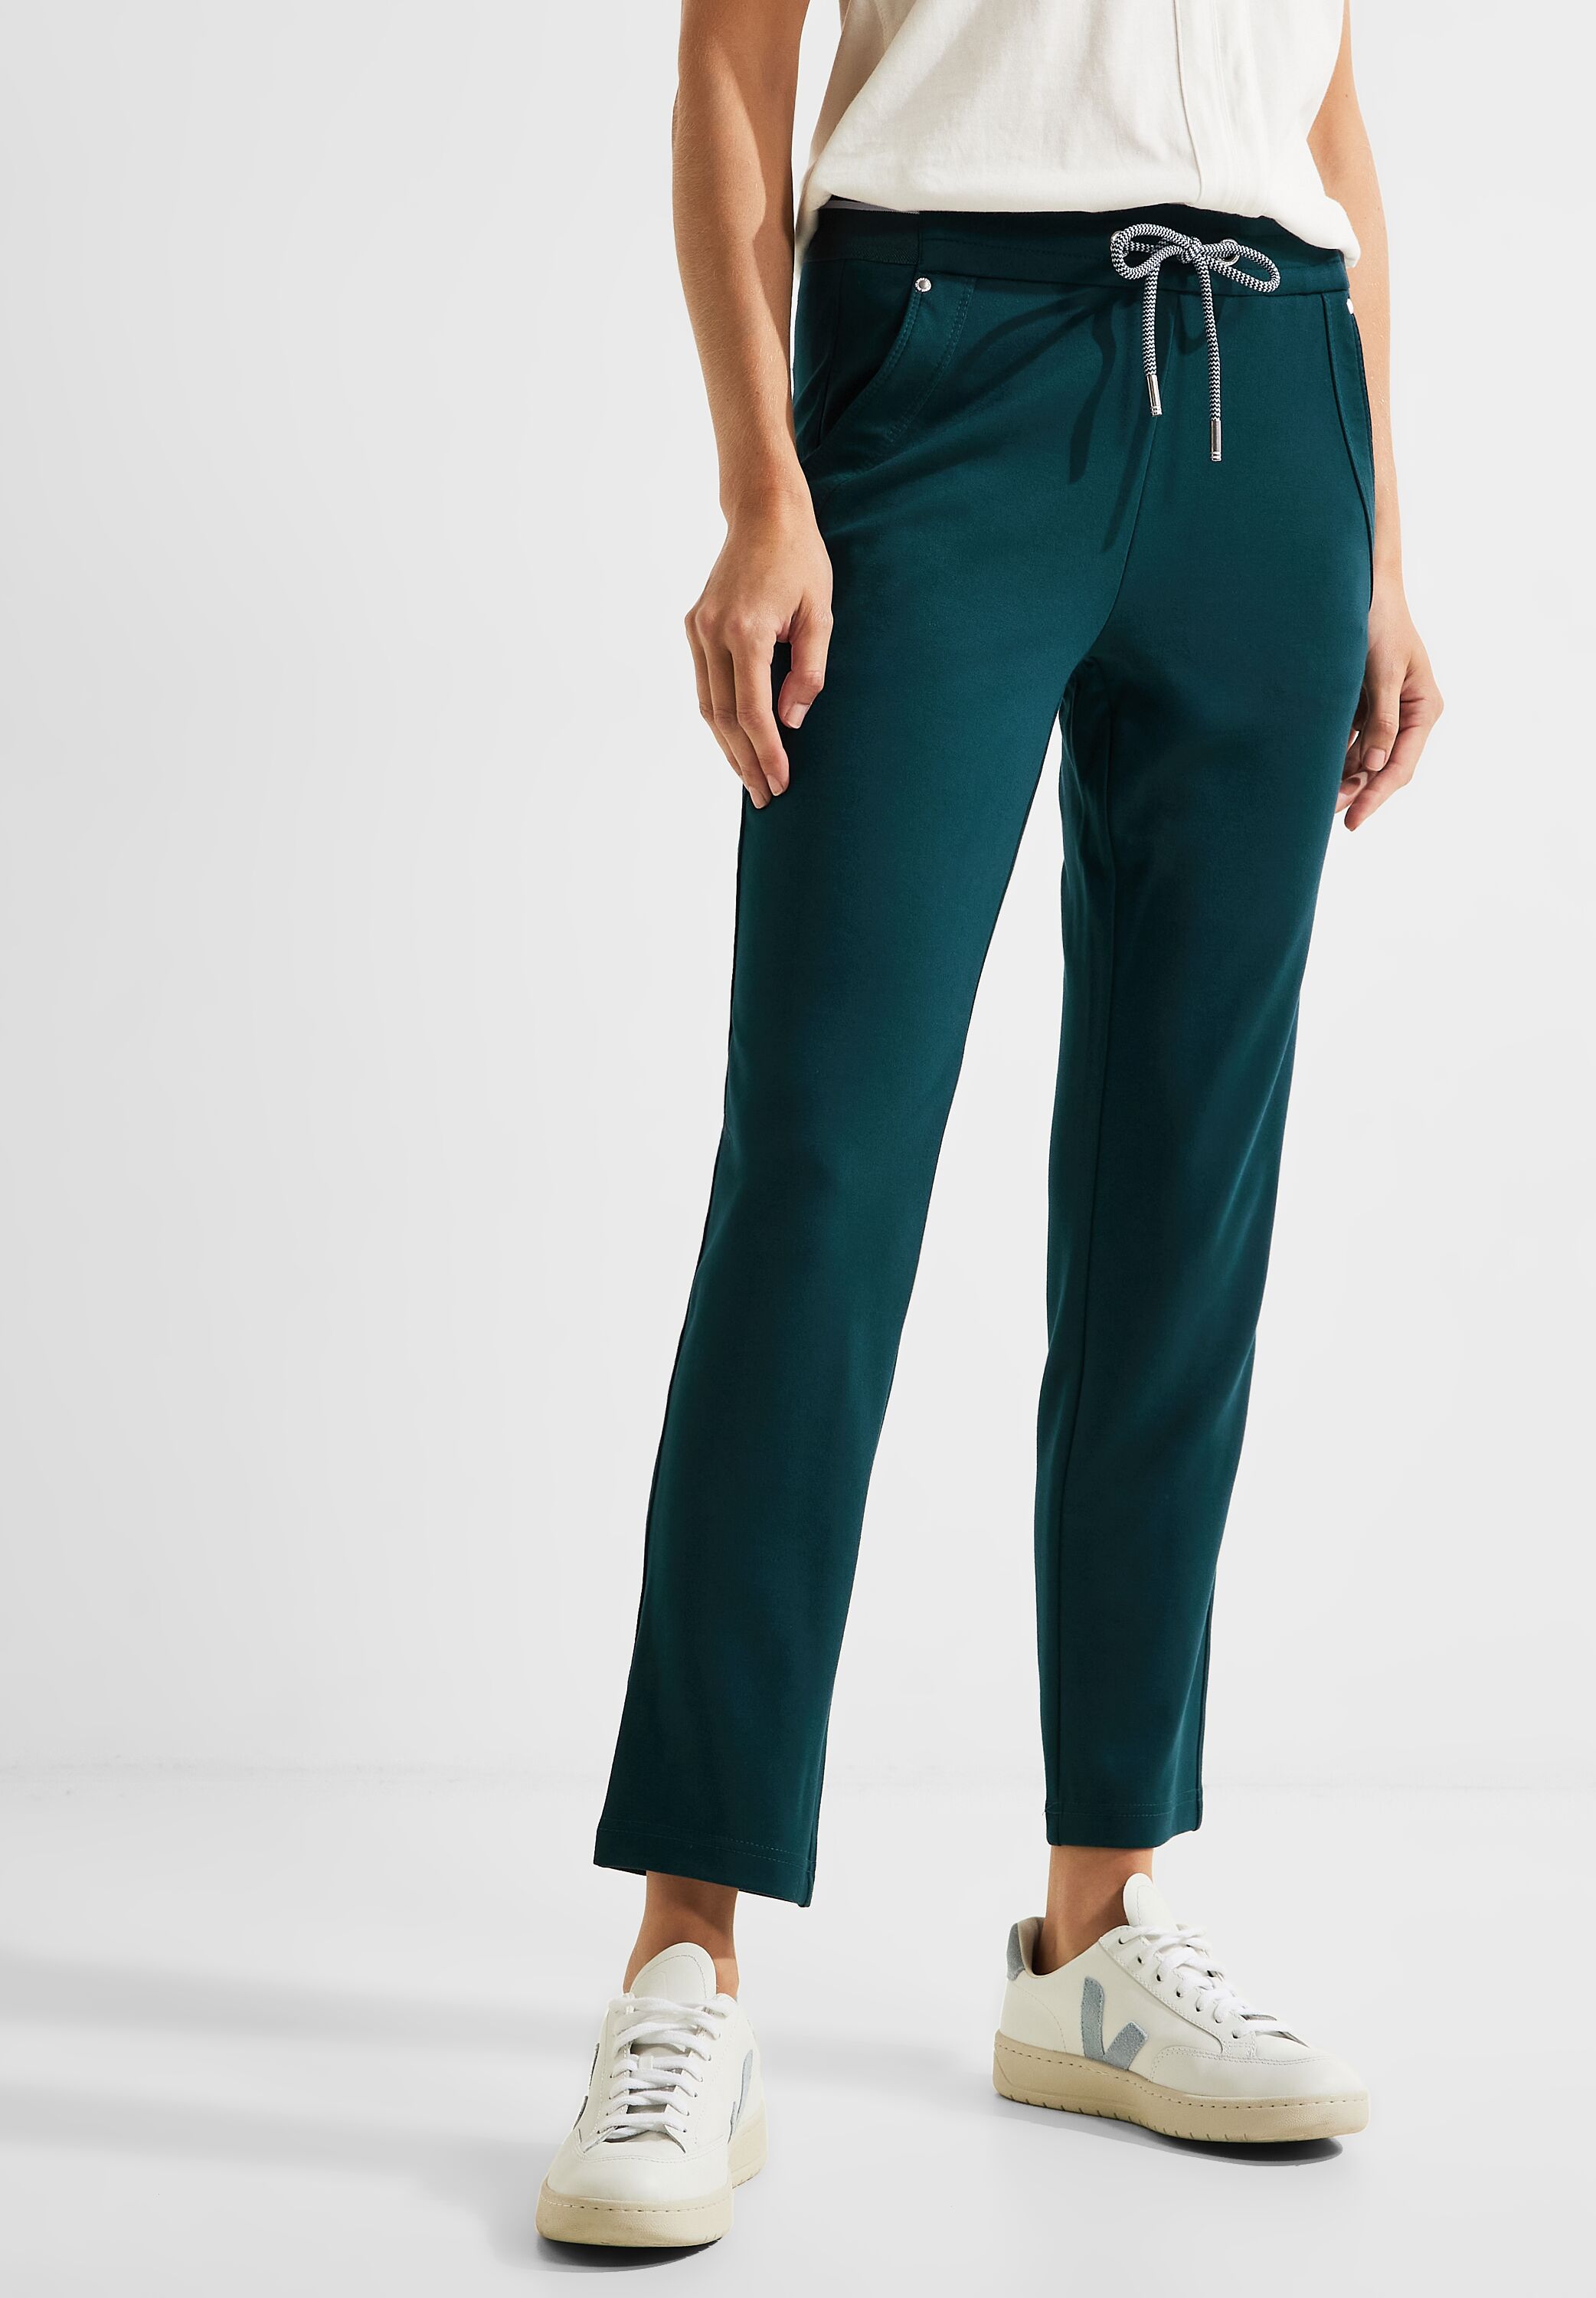 CECIL Joggpant Tracey in Deep Lake Green im SALE reduziert B376689-14926 -  CONCEPT Mode